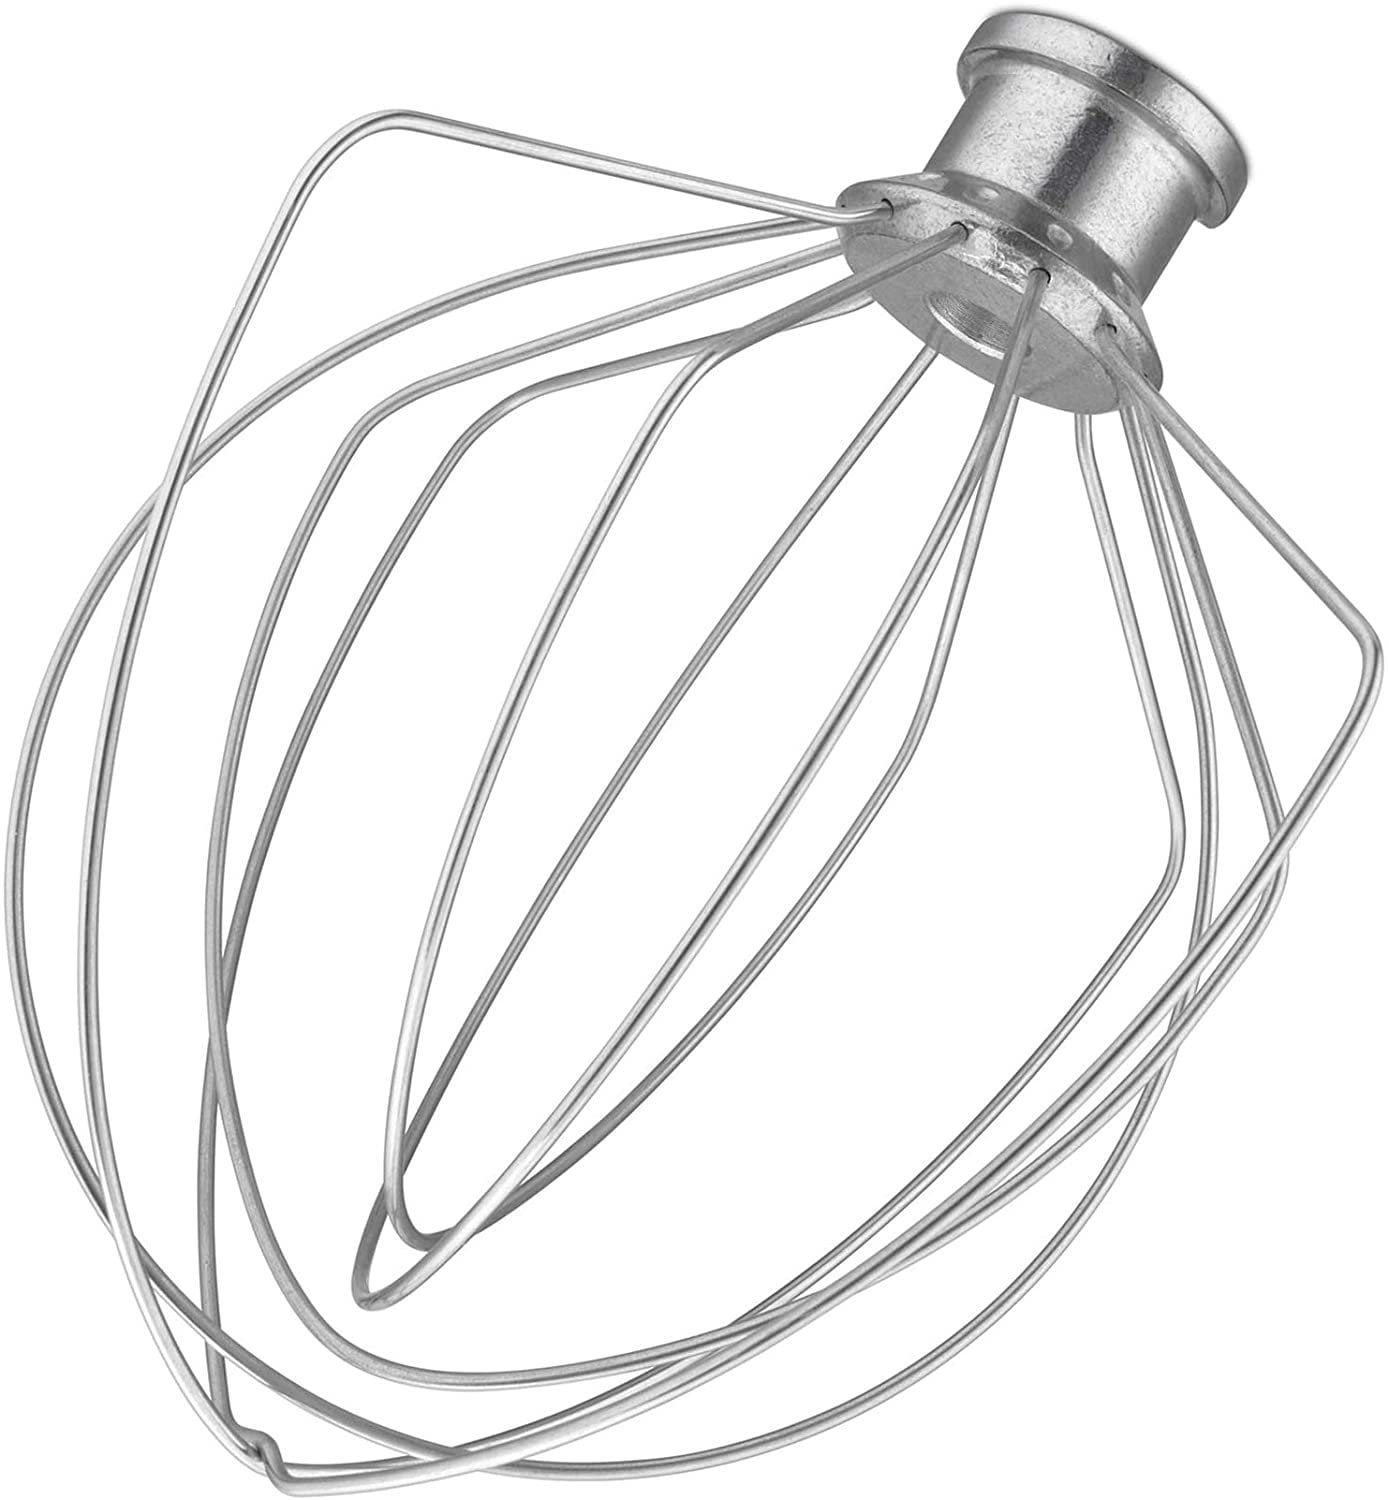 LETOMS Wire Whip for Kitchenaid Stand Mixer 5QT Lift and 6QT, Whisk  Attachment for Kitchenaid Mixer, Stainless Steel Egg Cream Stirrer